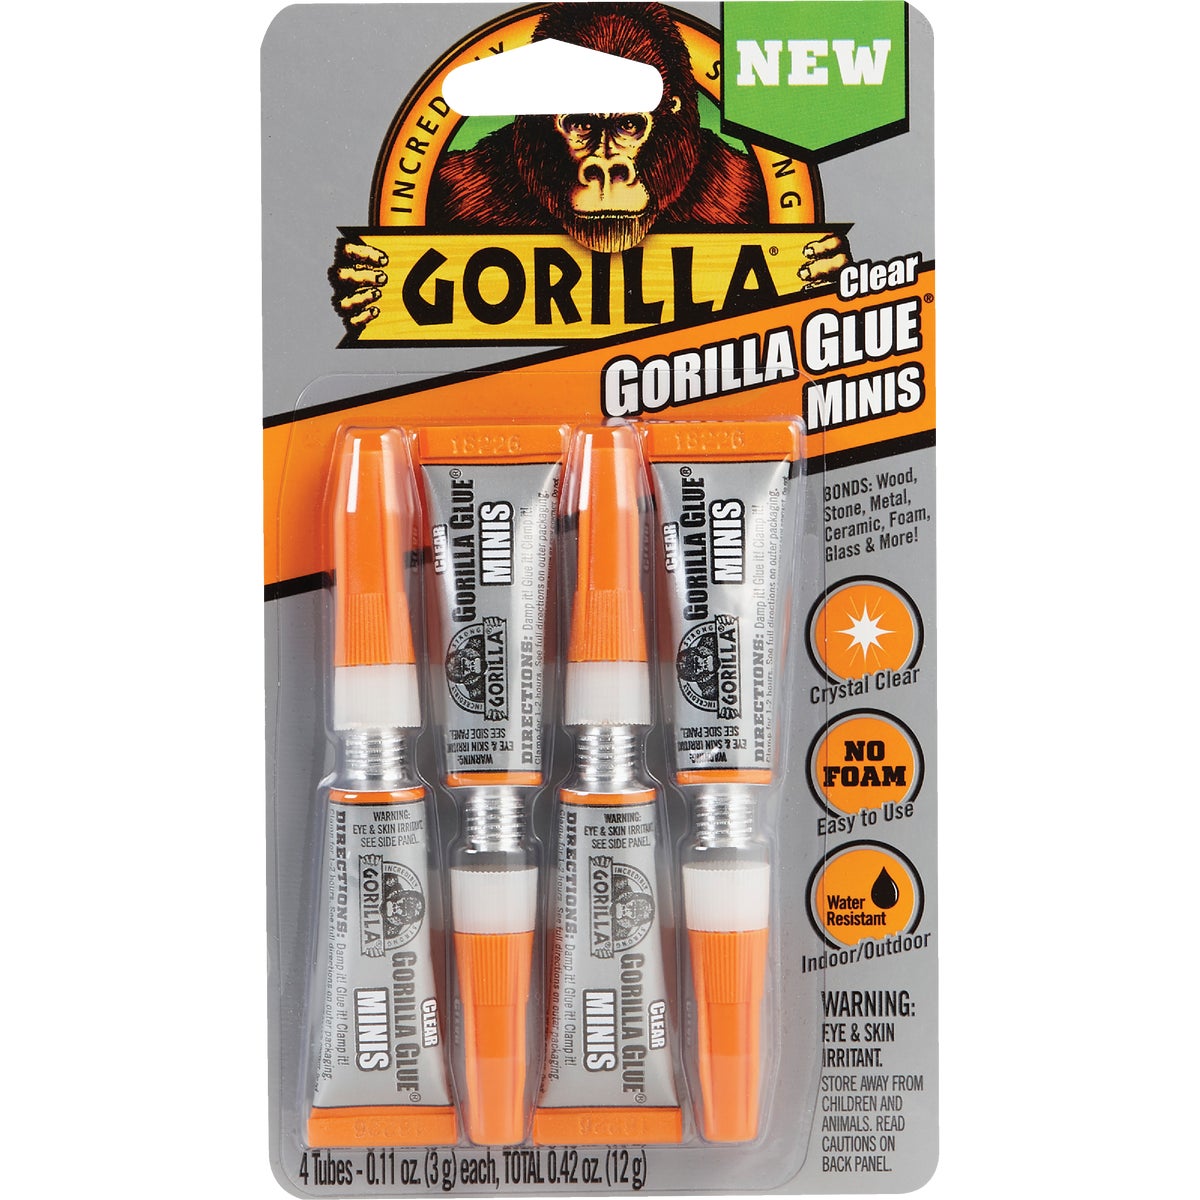 Item 303945, Clear Gorilla Glue is a non-foaming, flexible, fast setting, crystal clear 